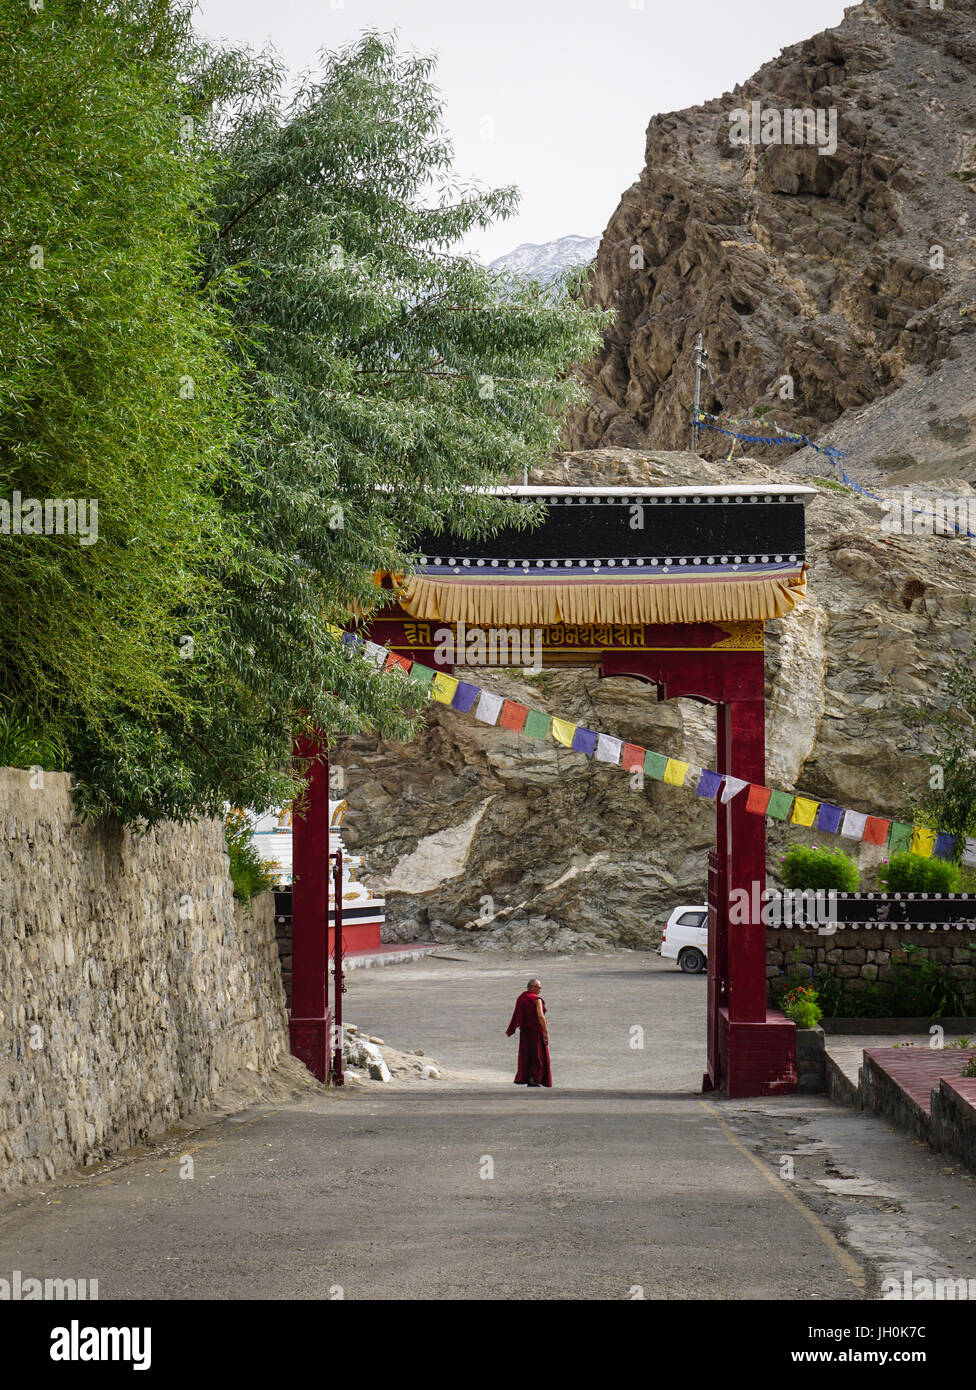 Ladakh, India - Jul 17, 2015. The gate of Thiksey Monastery in Ladakh, India. Thiksey Monastery is one of the important and largest monasteries in the Stock Photo